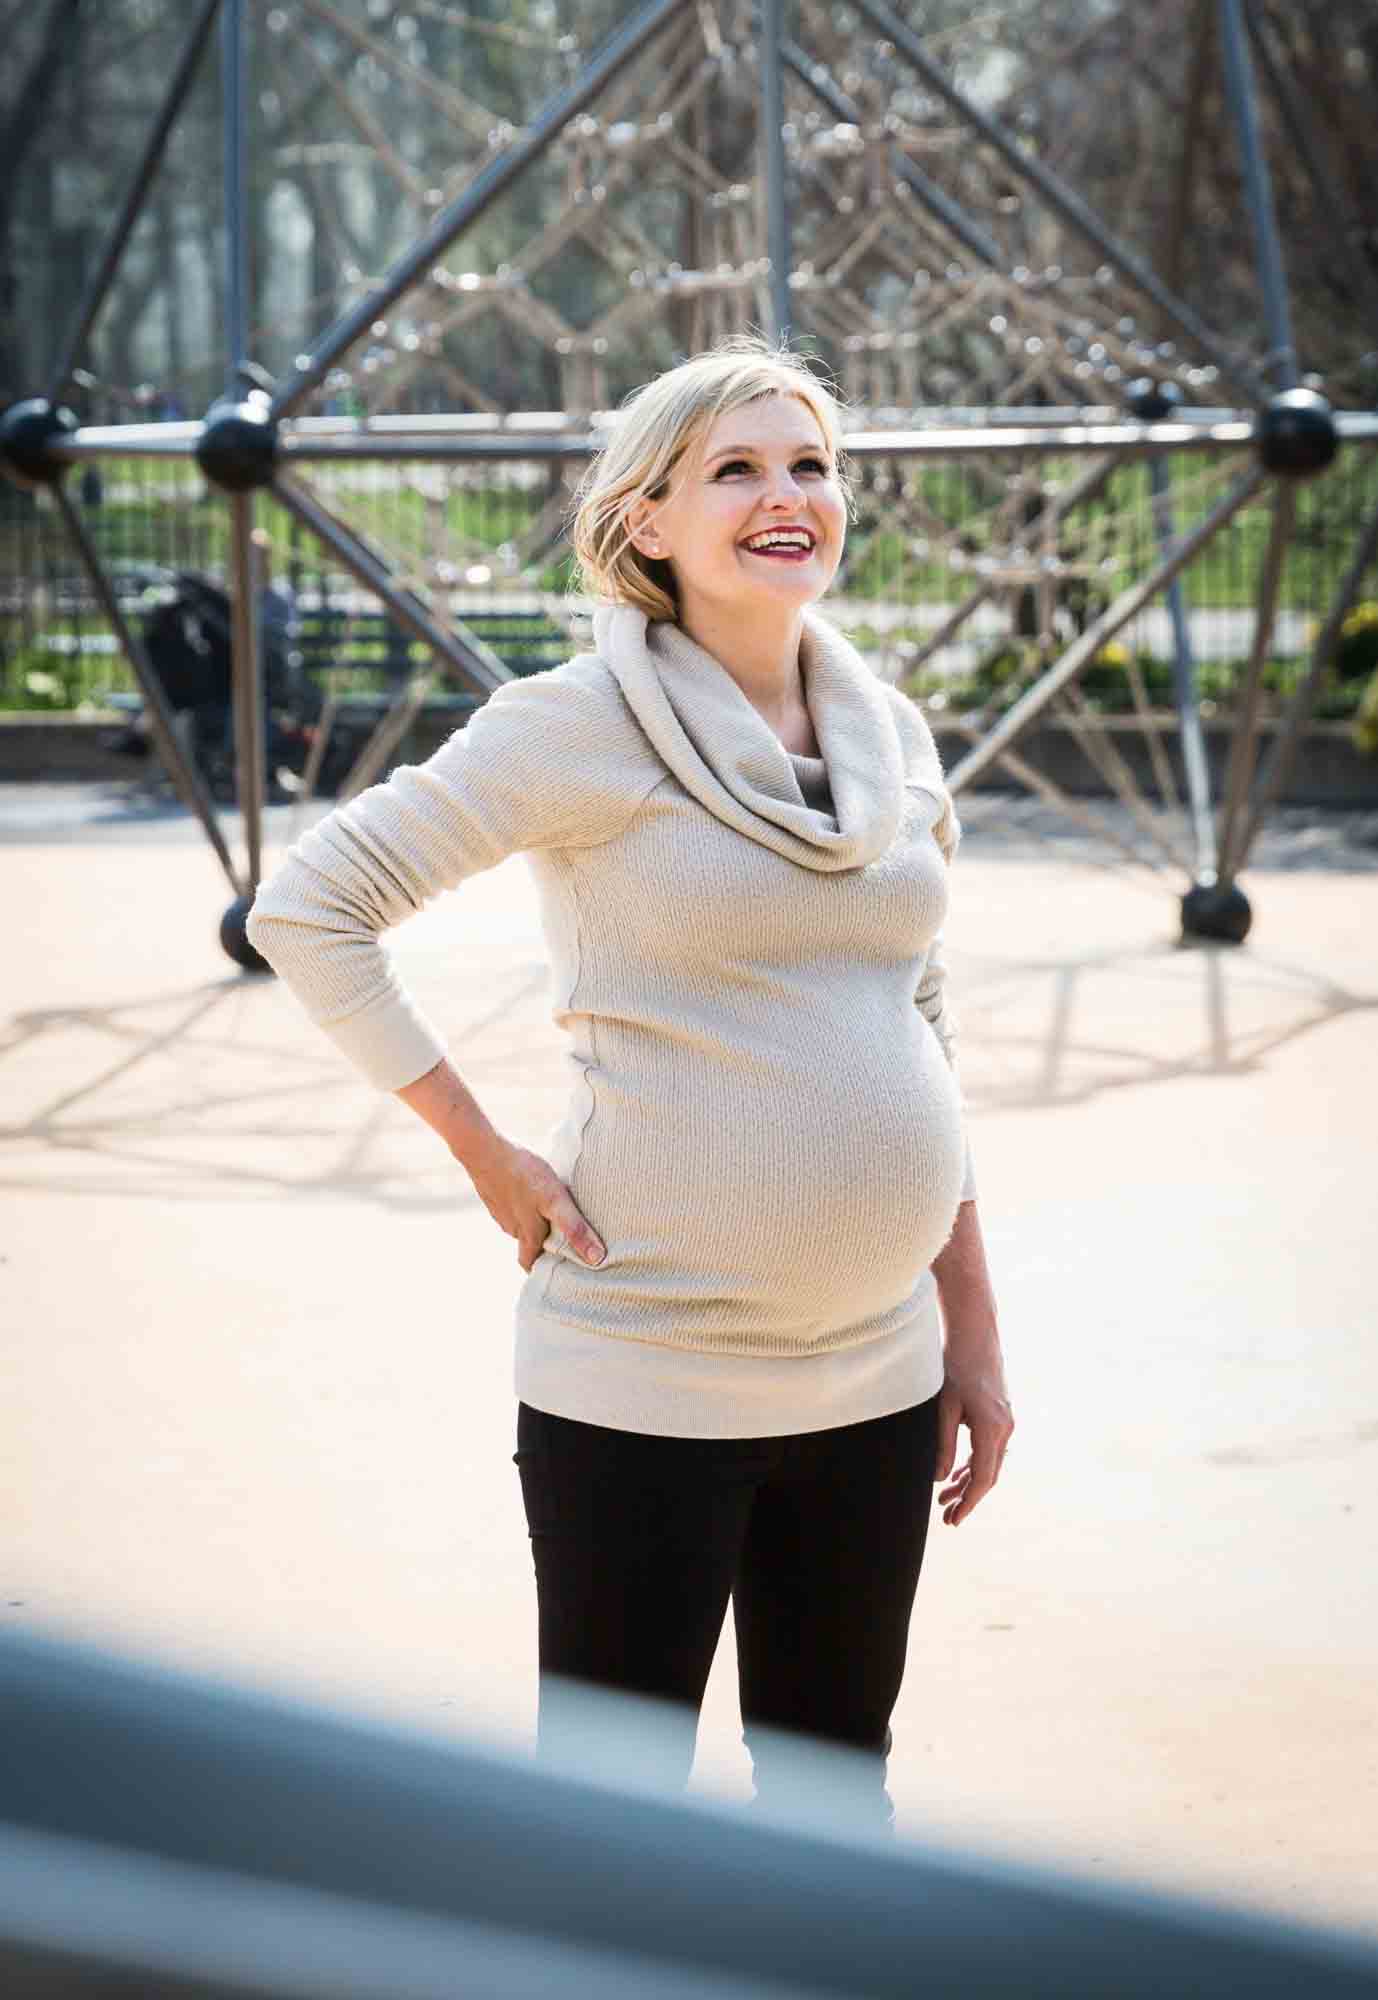 Pregnant mother at playground for an article on the best family portrait poses